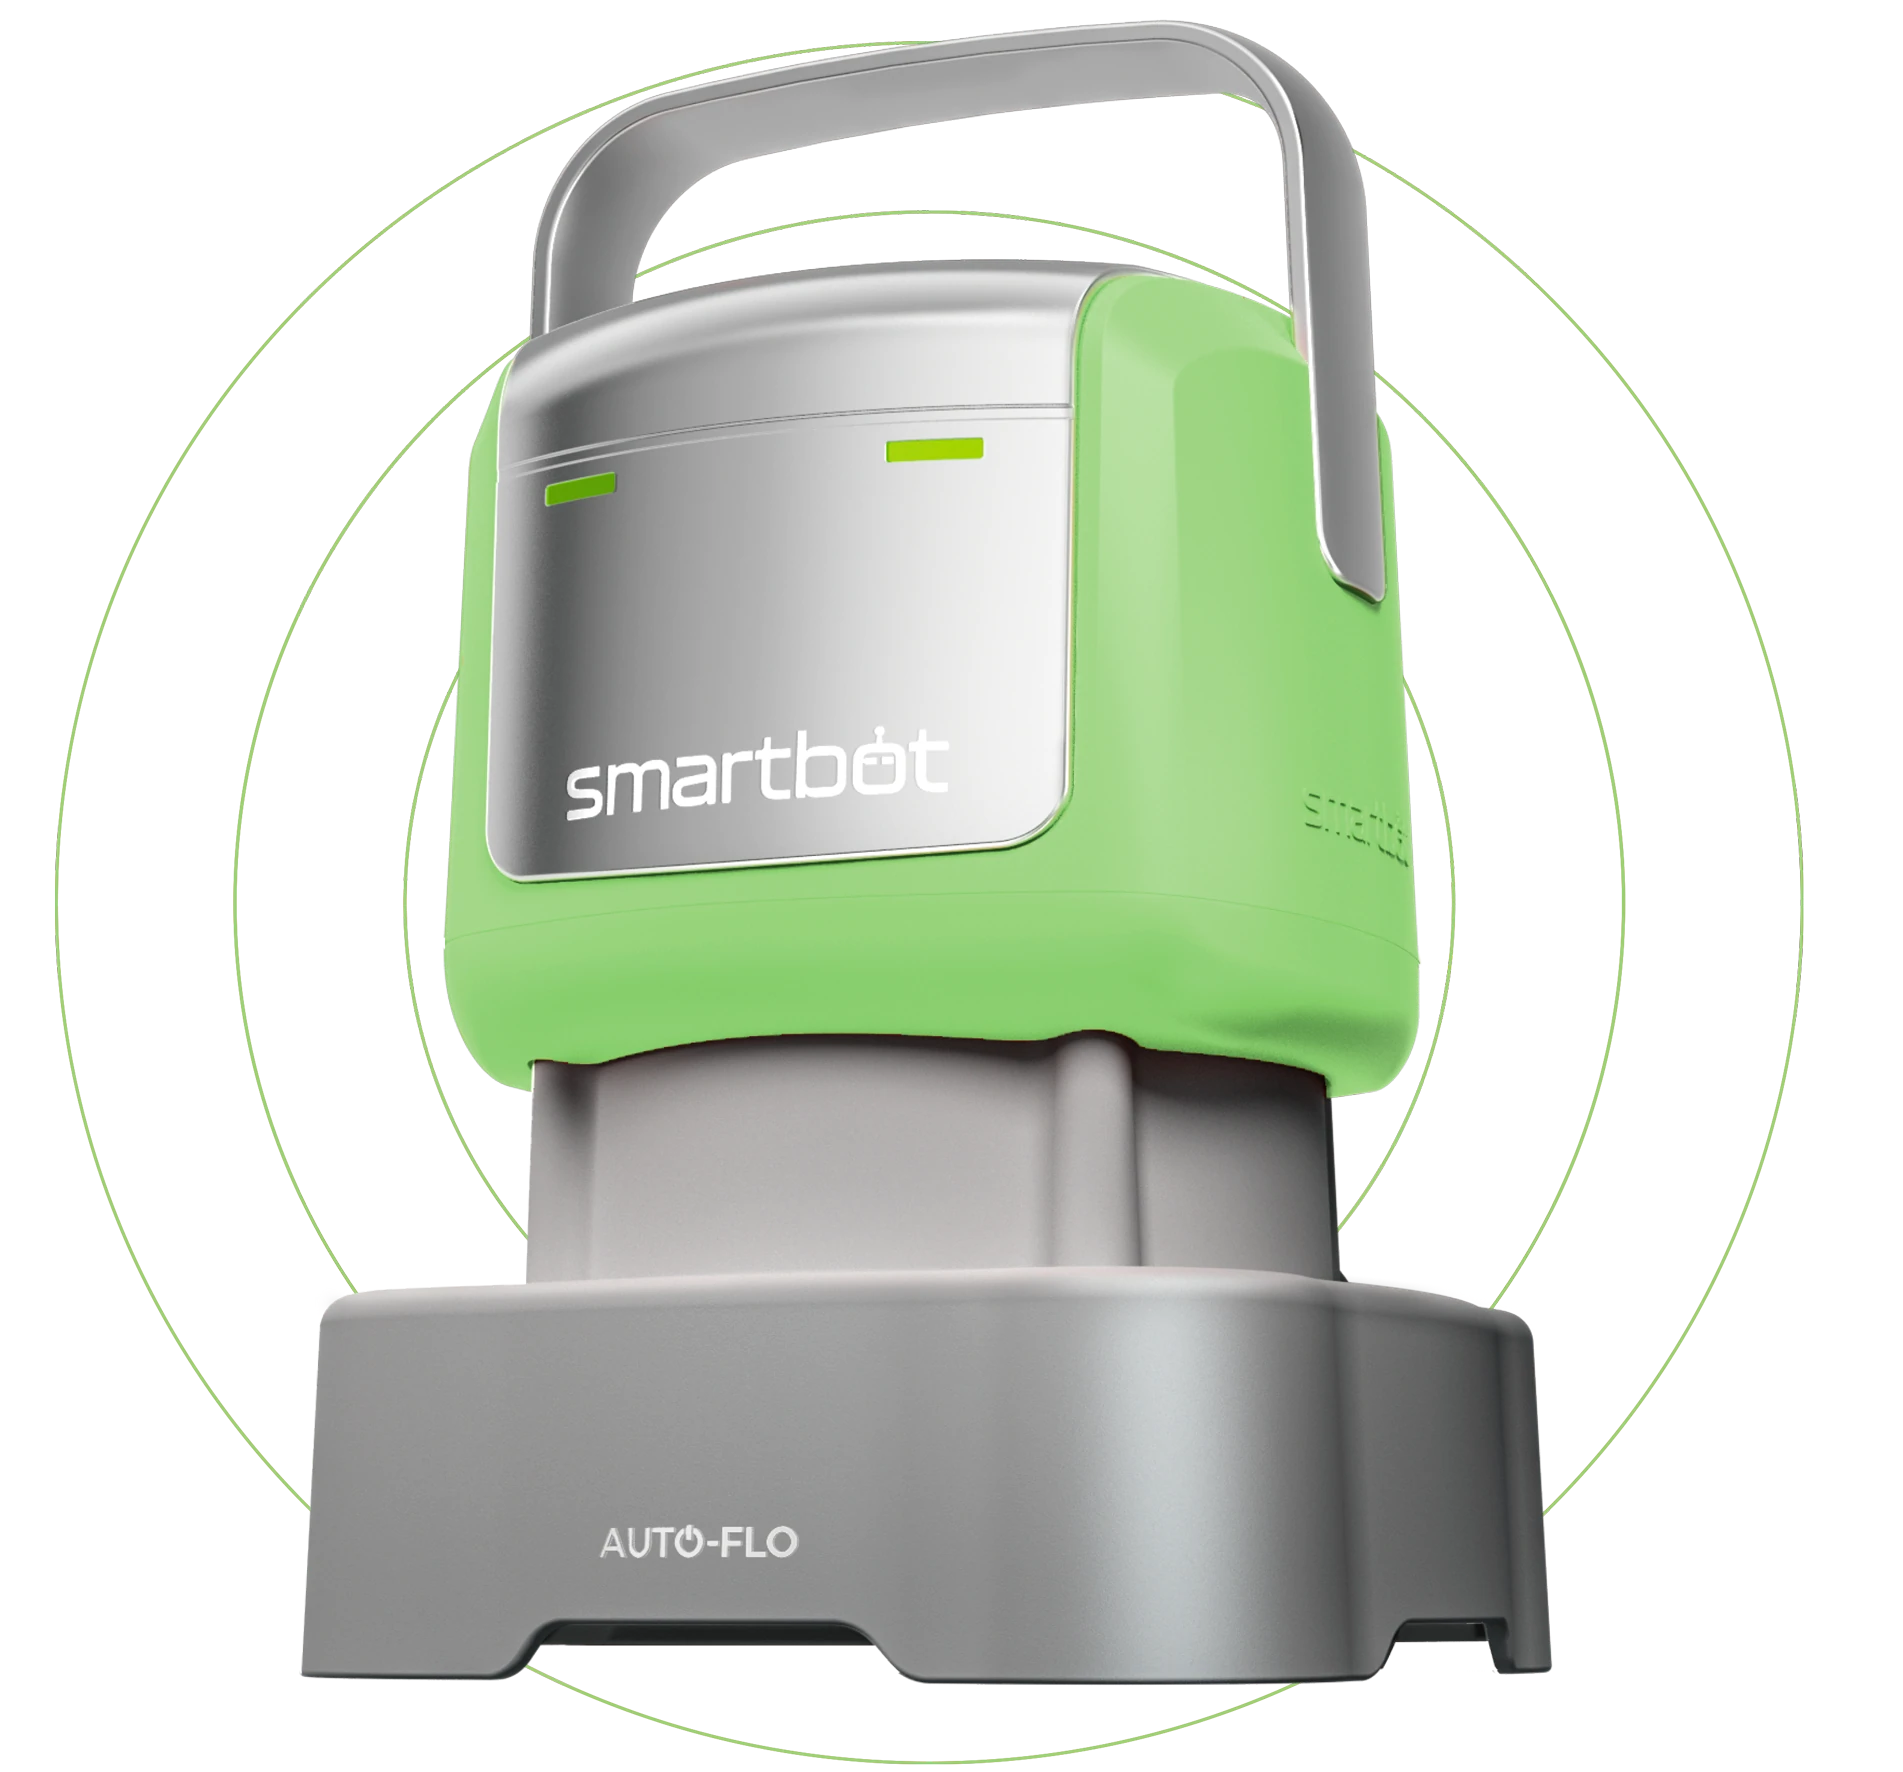 Smartbot in green